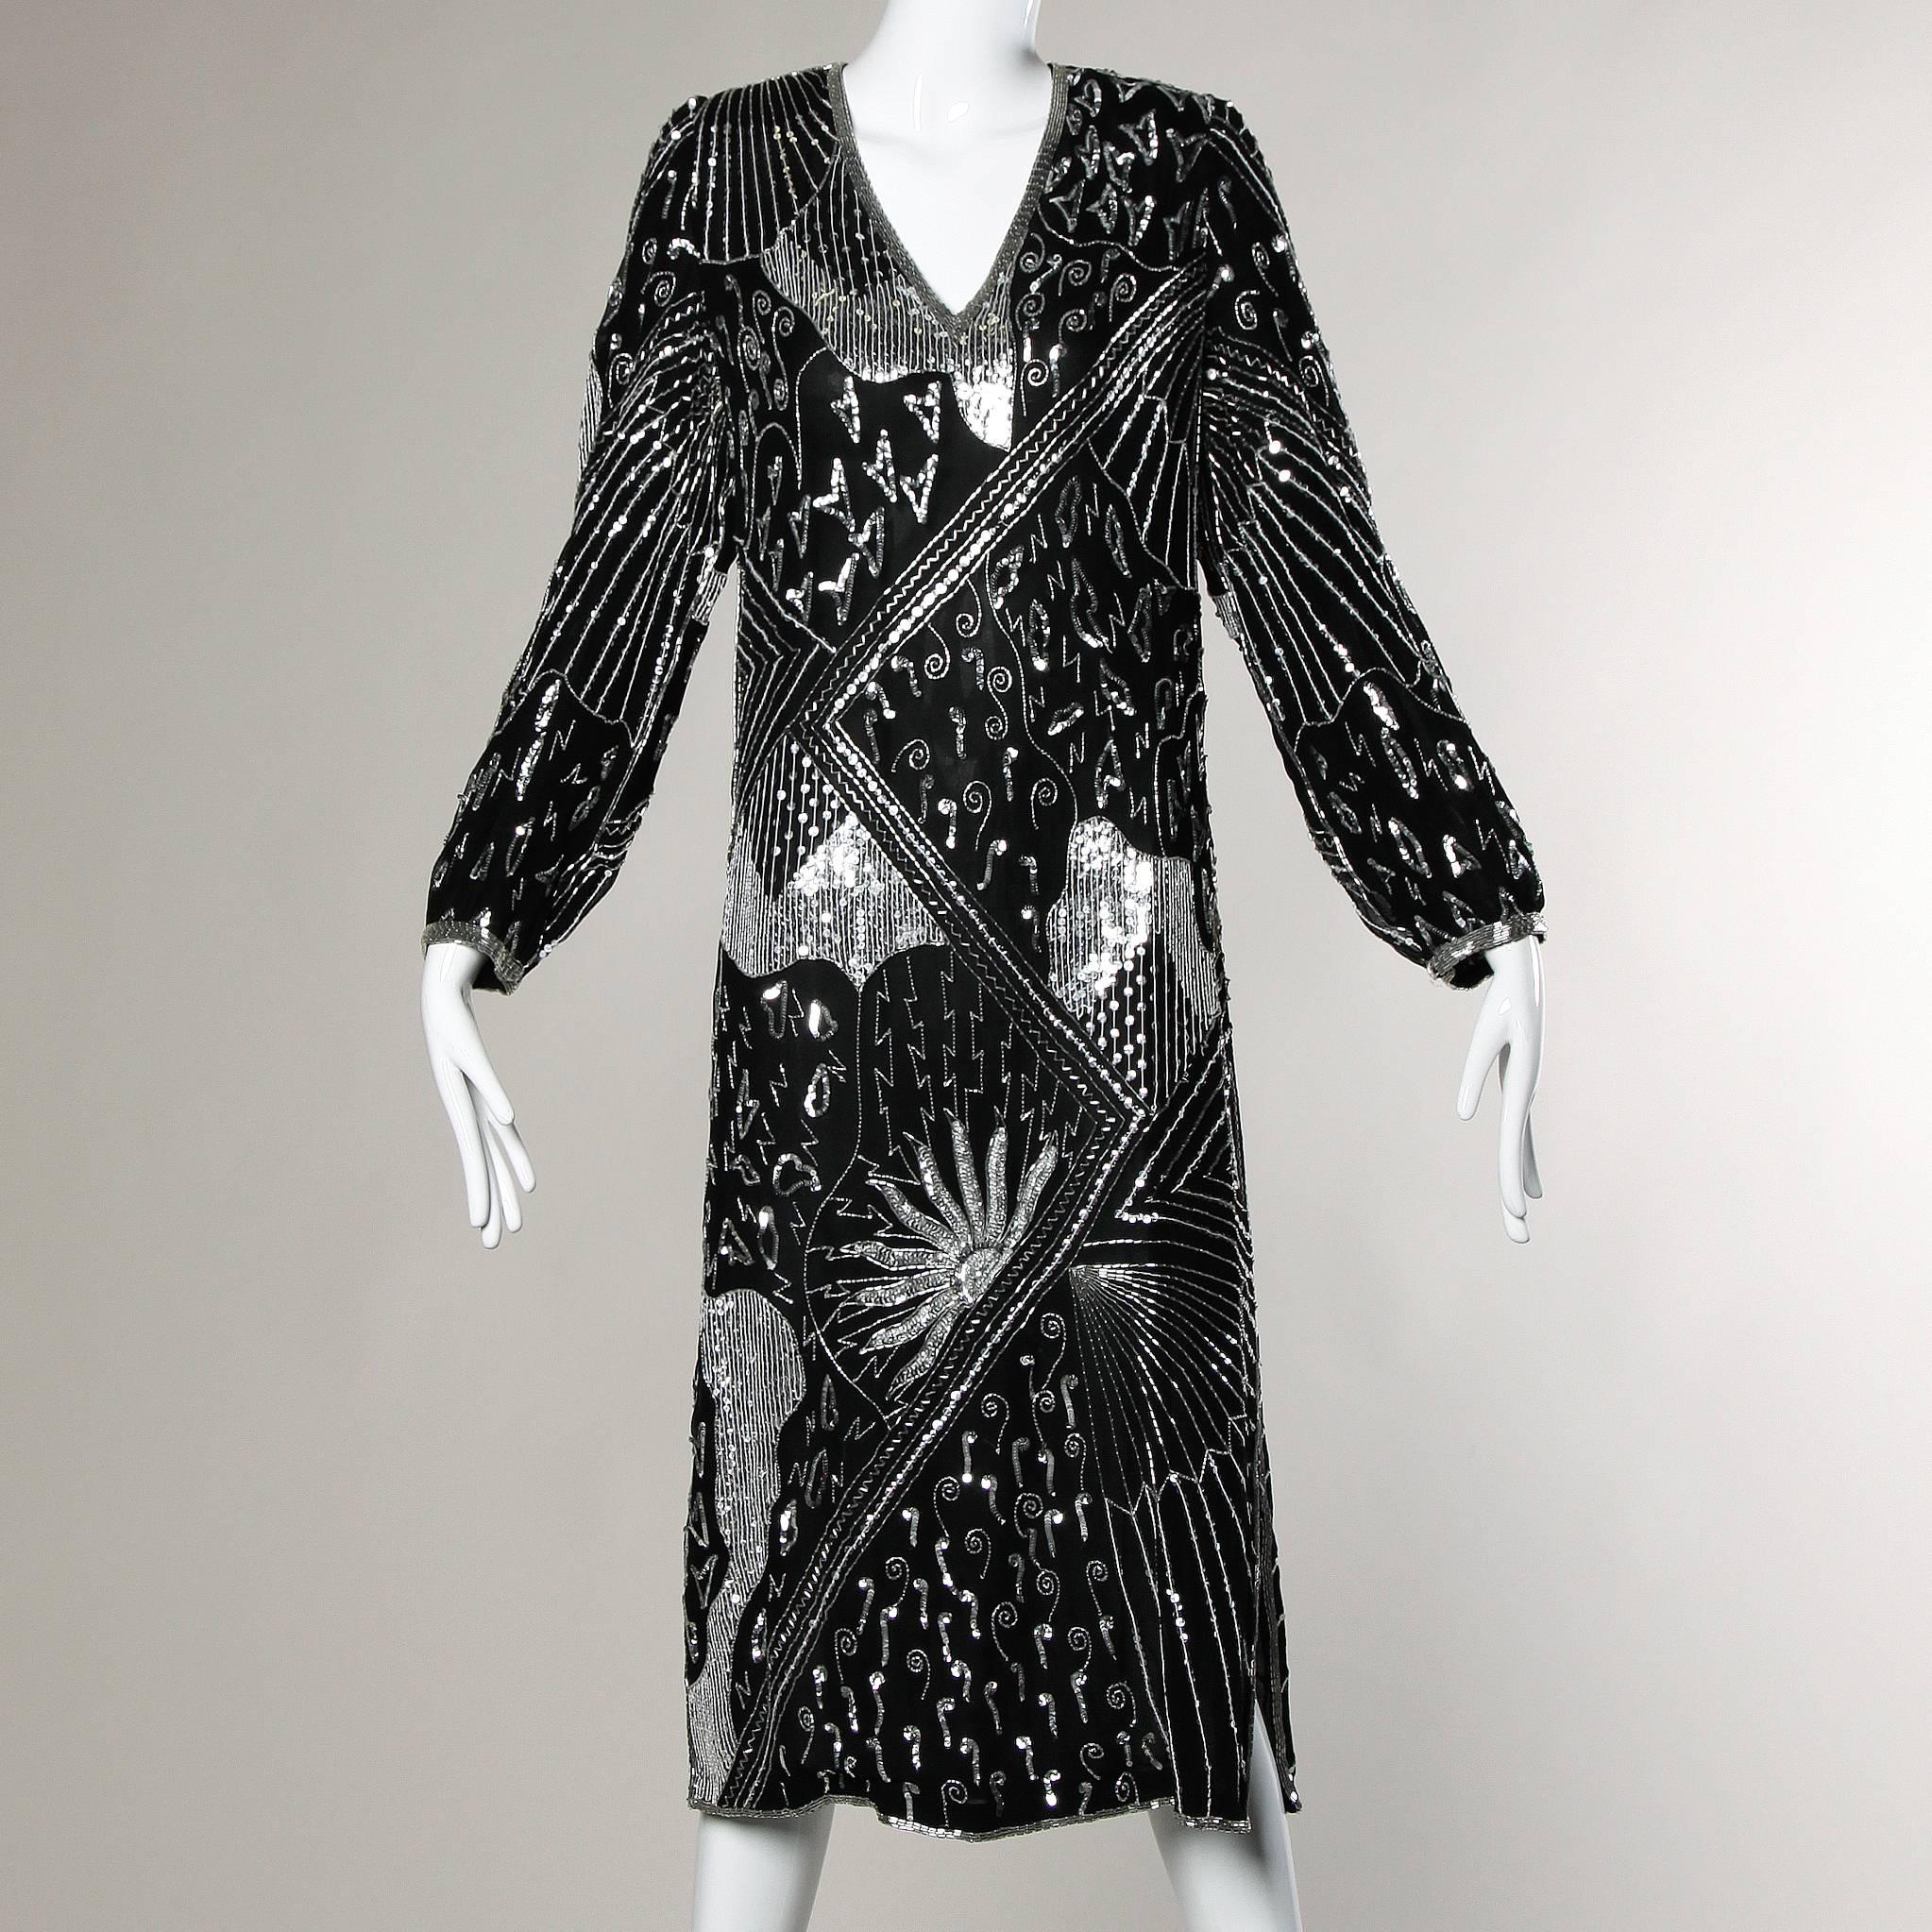 Flapper-inspired silk beaded and sequin dress with a V-neck and side slits by Saks Fifth Avenue.

Details:

Fully Lined
Shoulder Pads Can Easily Be Removed If Desired
Marked Size: M
Estimated Size: S-M
Color: Black/ Silver Metallic 
Fabric: